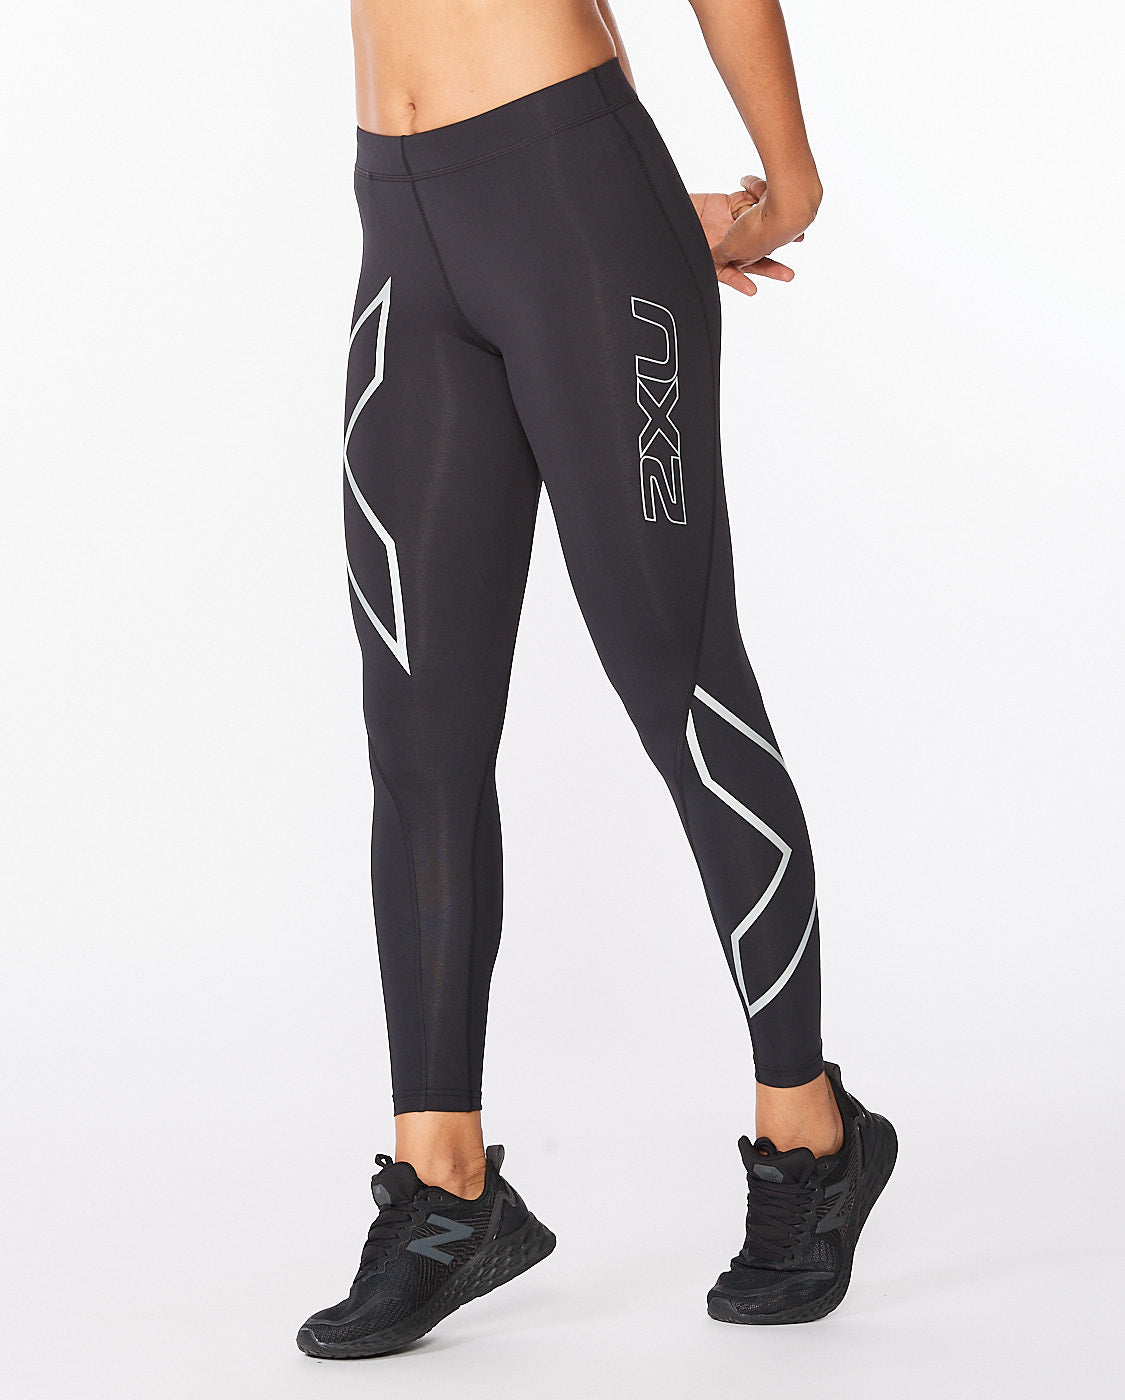 Capris Tights & Pants *  2Xu Women'S Ignition Shield Compression